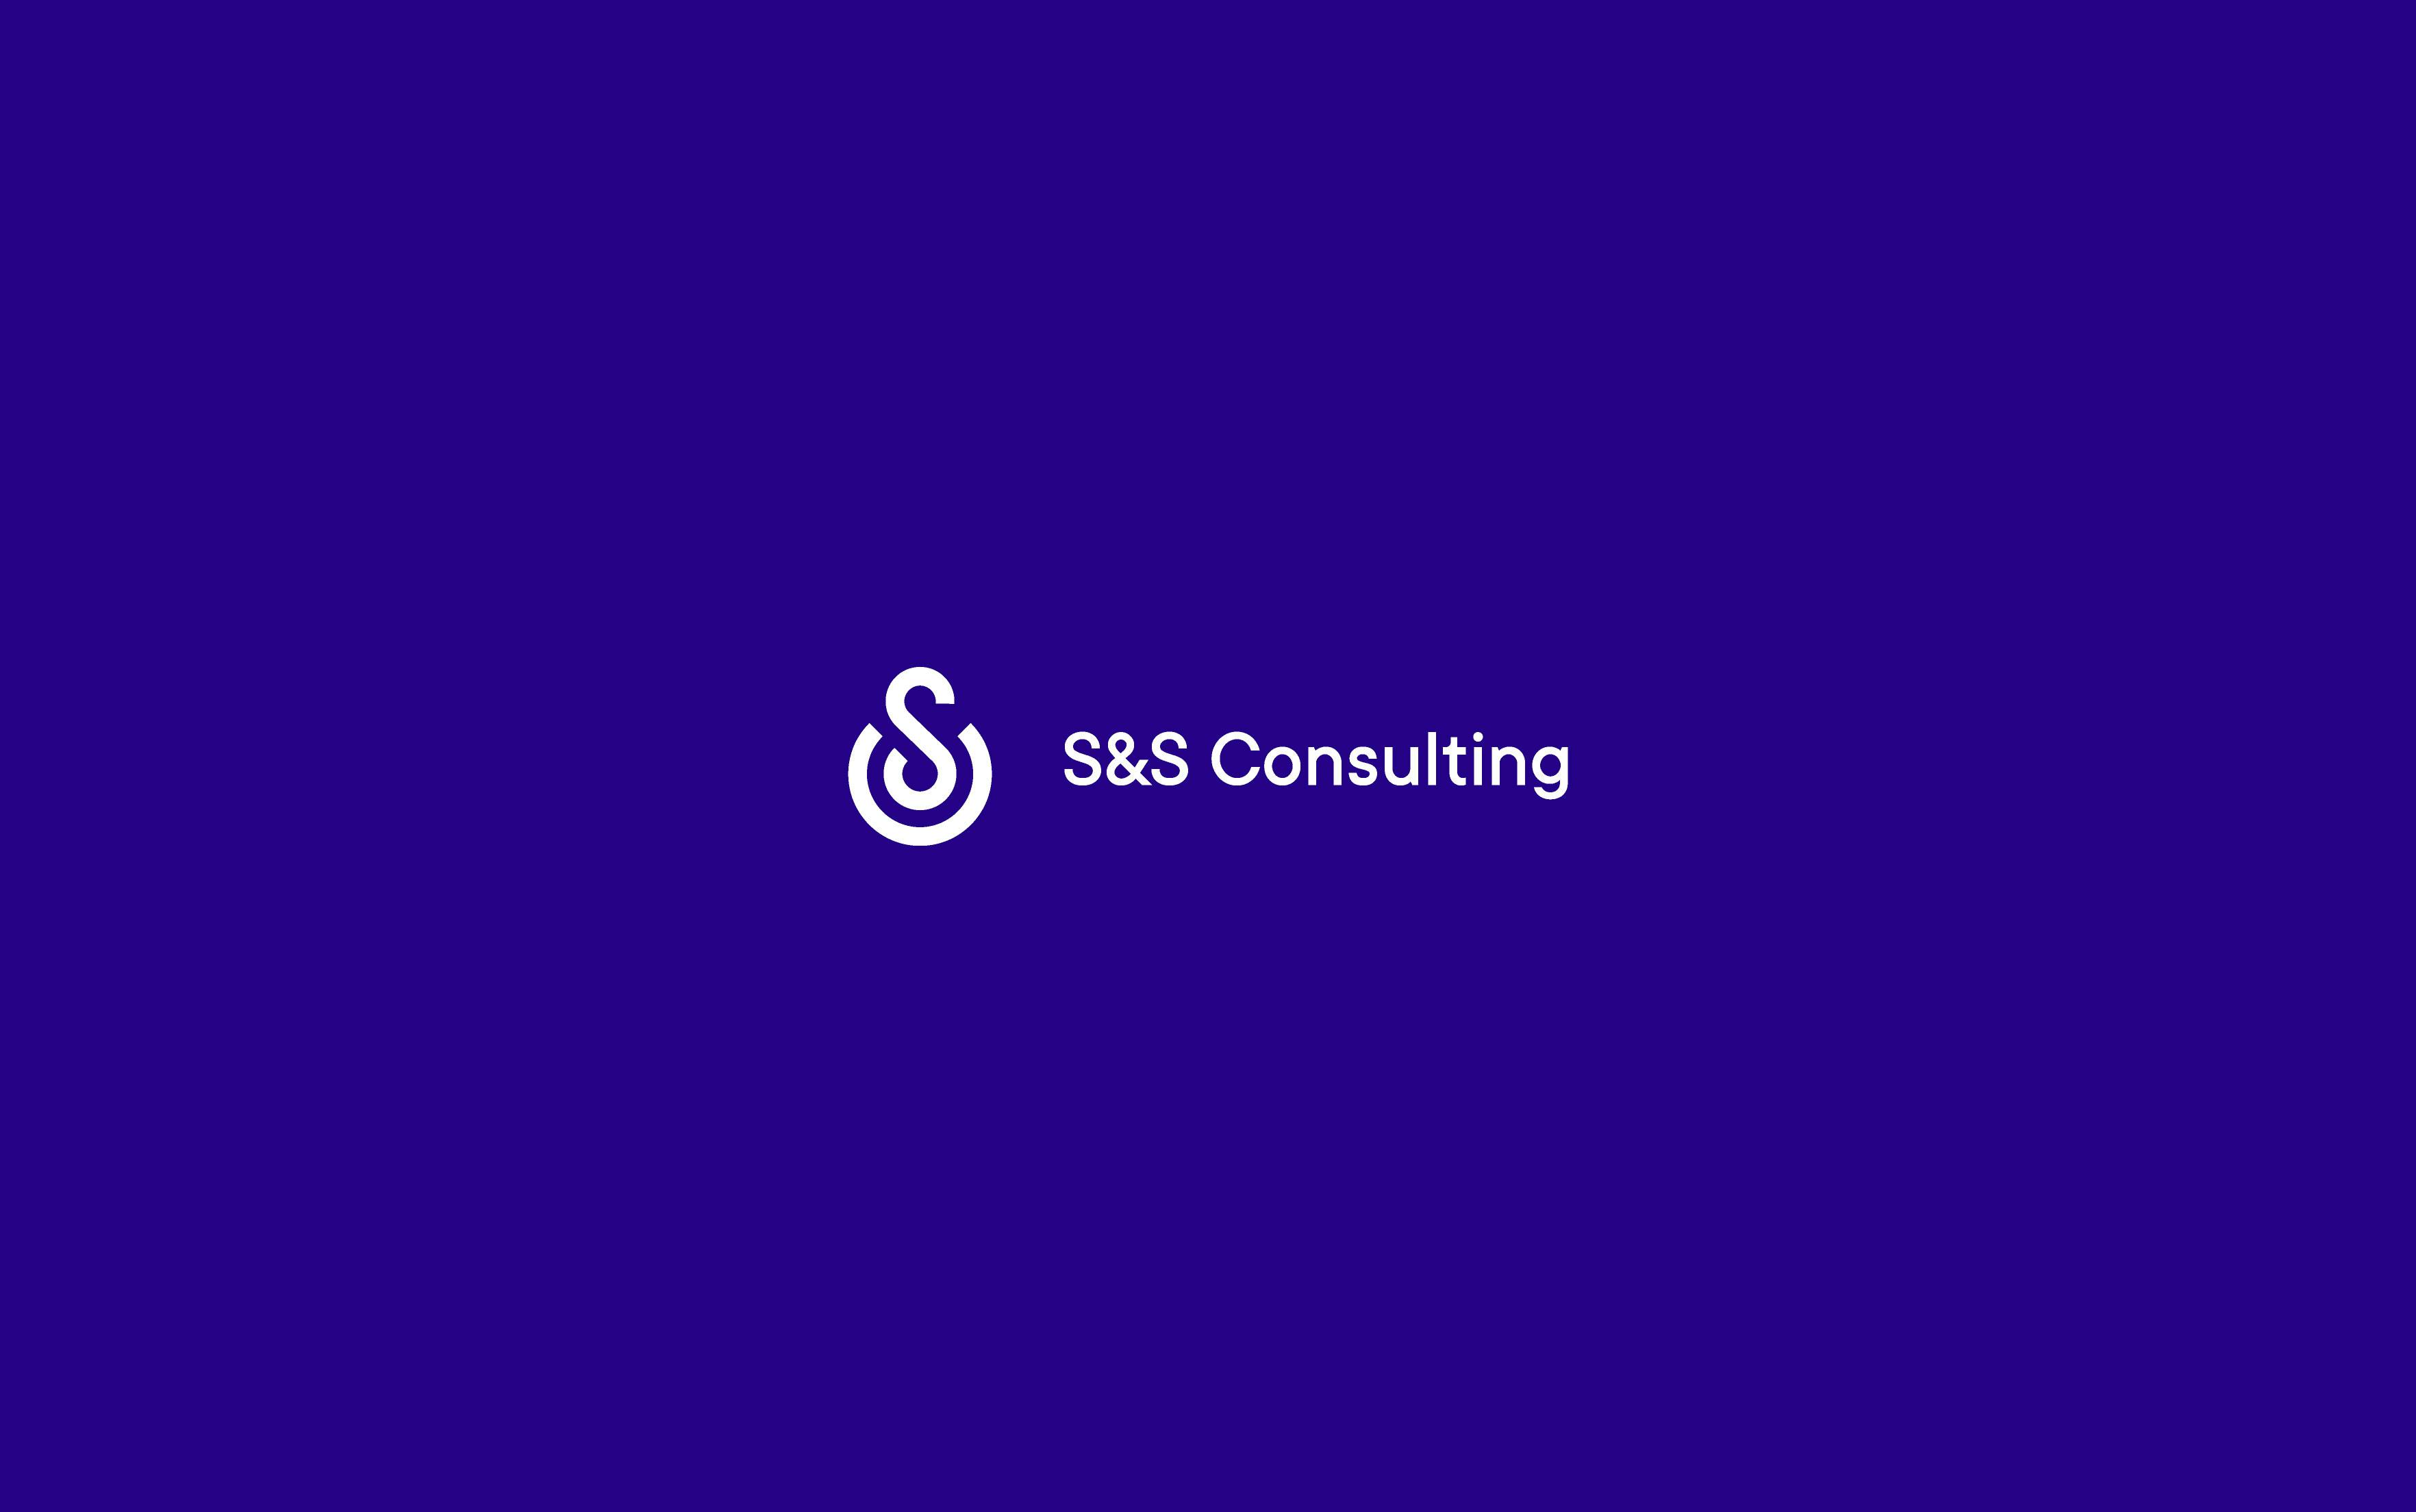 https://site.no11.ee/wp-content/uploads/2019/04/No11_SS-Consulting_logo-design.jpg